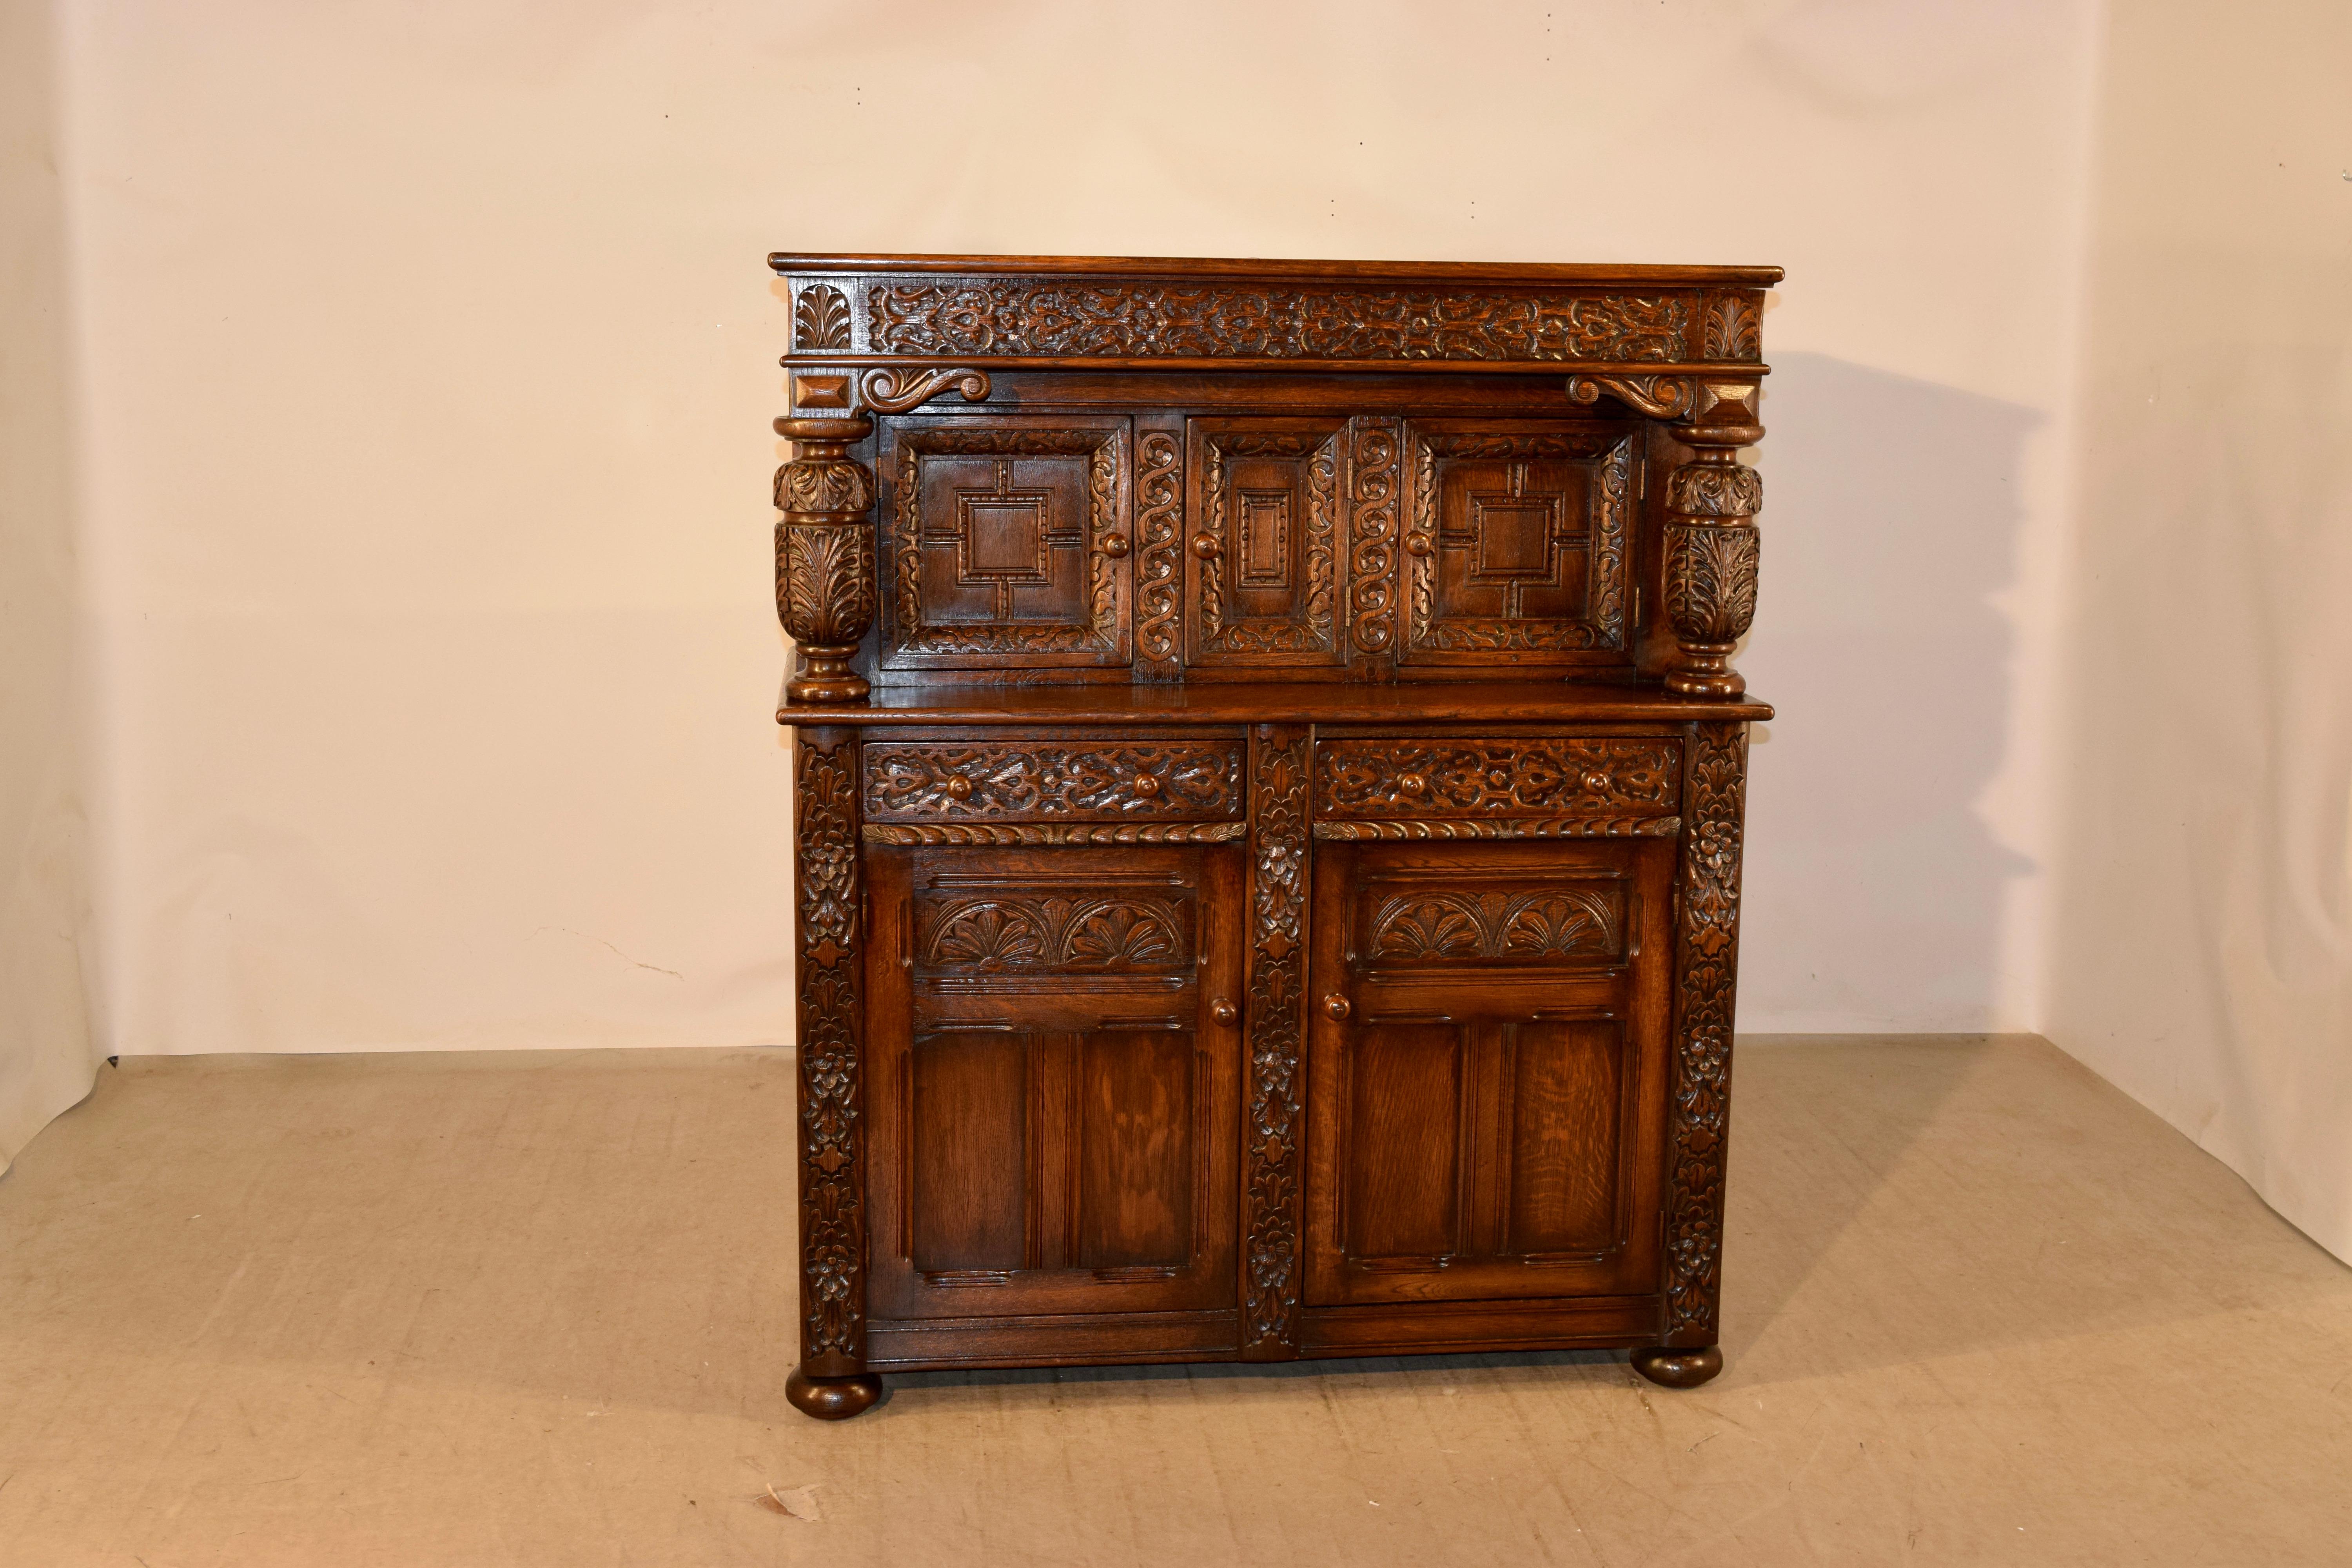 Circa 1900-1909 English oak court cupboard by Waring & Gillow. This cupboard is of tremendous quality and has a heavily carved case. The upper molding is heavily carved and is over three paneled doors, which open to reveal storage. There are two